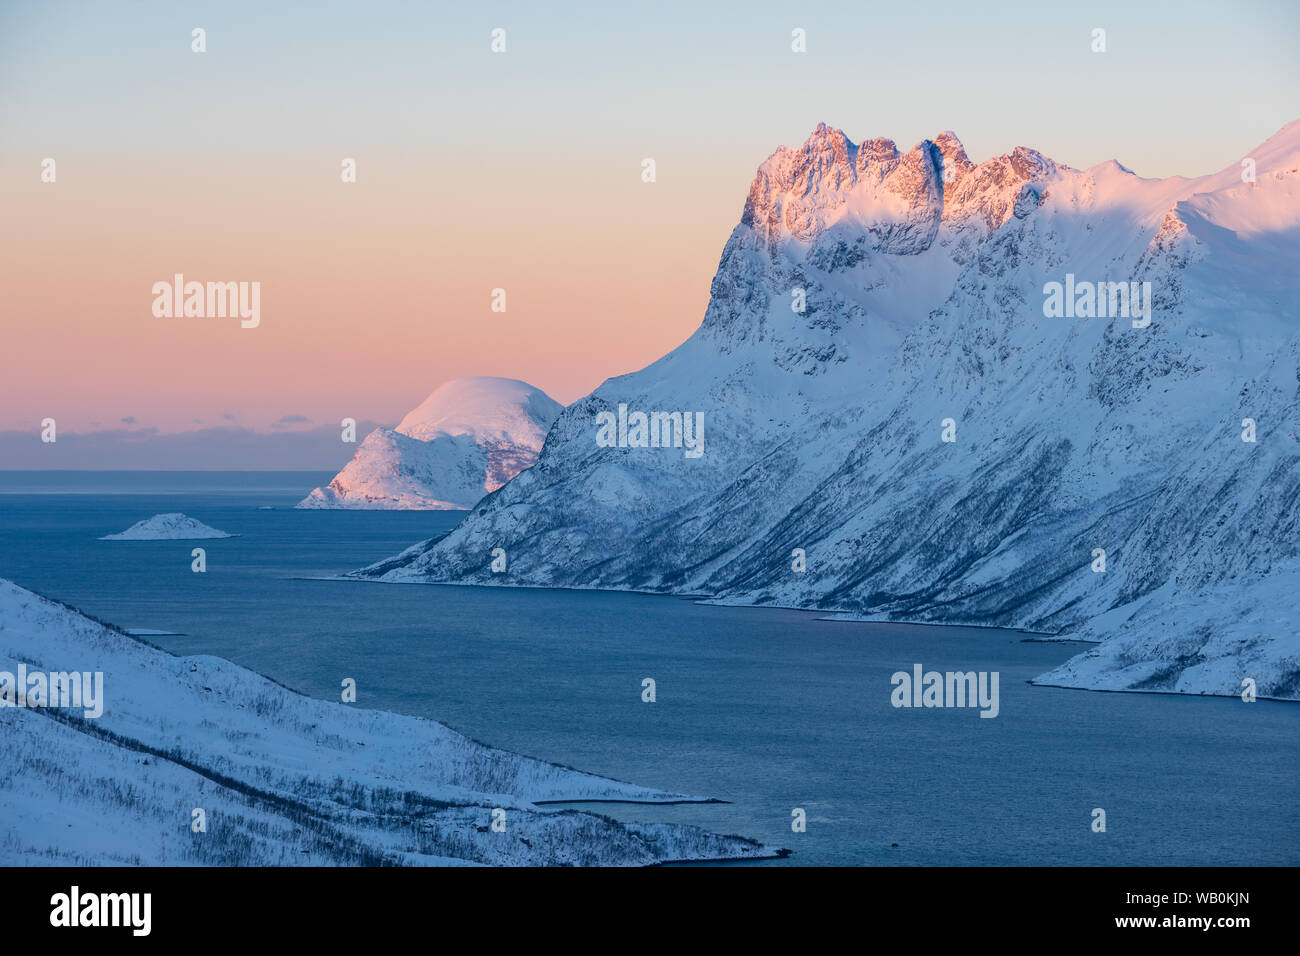 Arctic landscape: Snowcapped mountain skamtinde in winter in fjord at sunrise, Ersfjord Norway Stock Photo